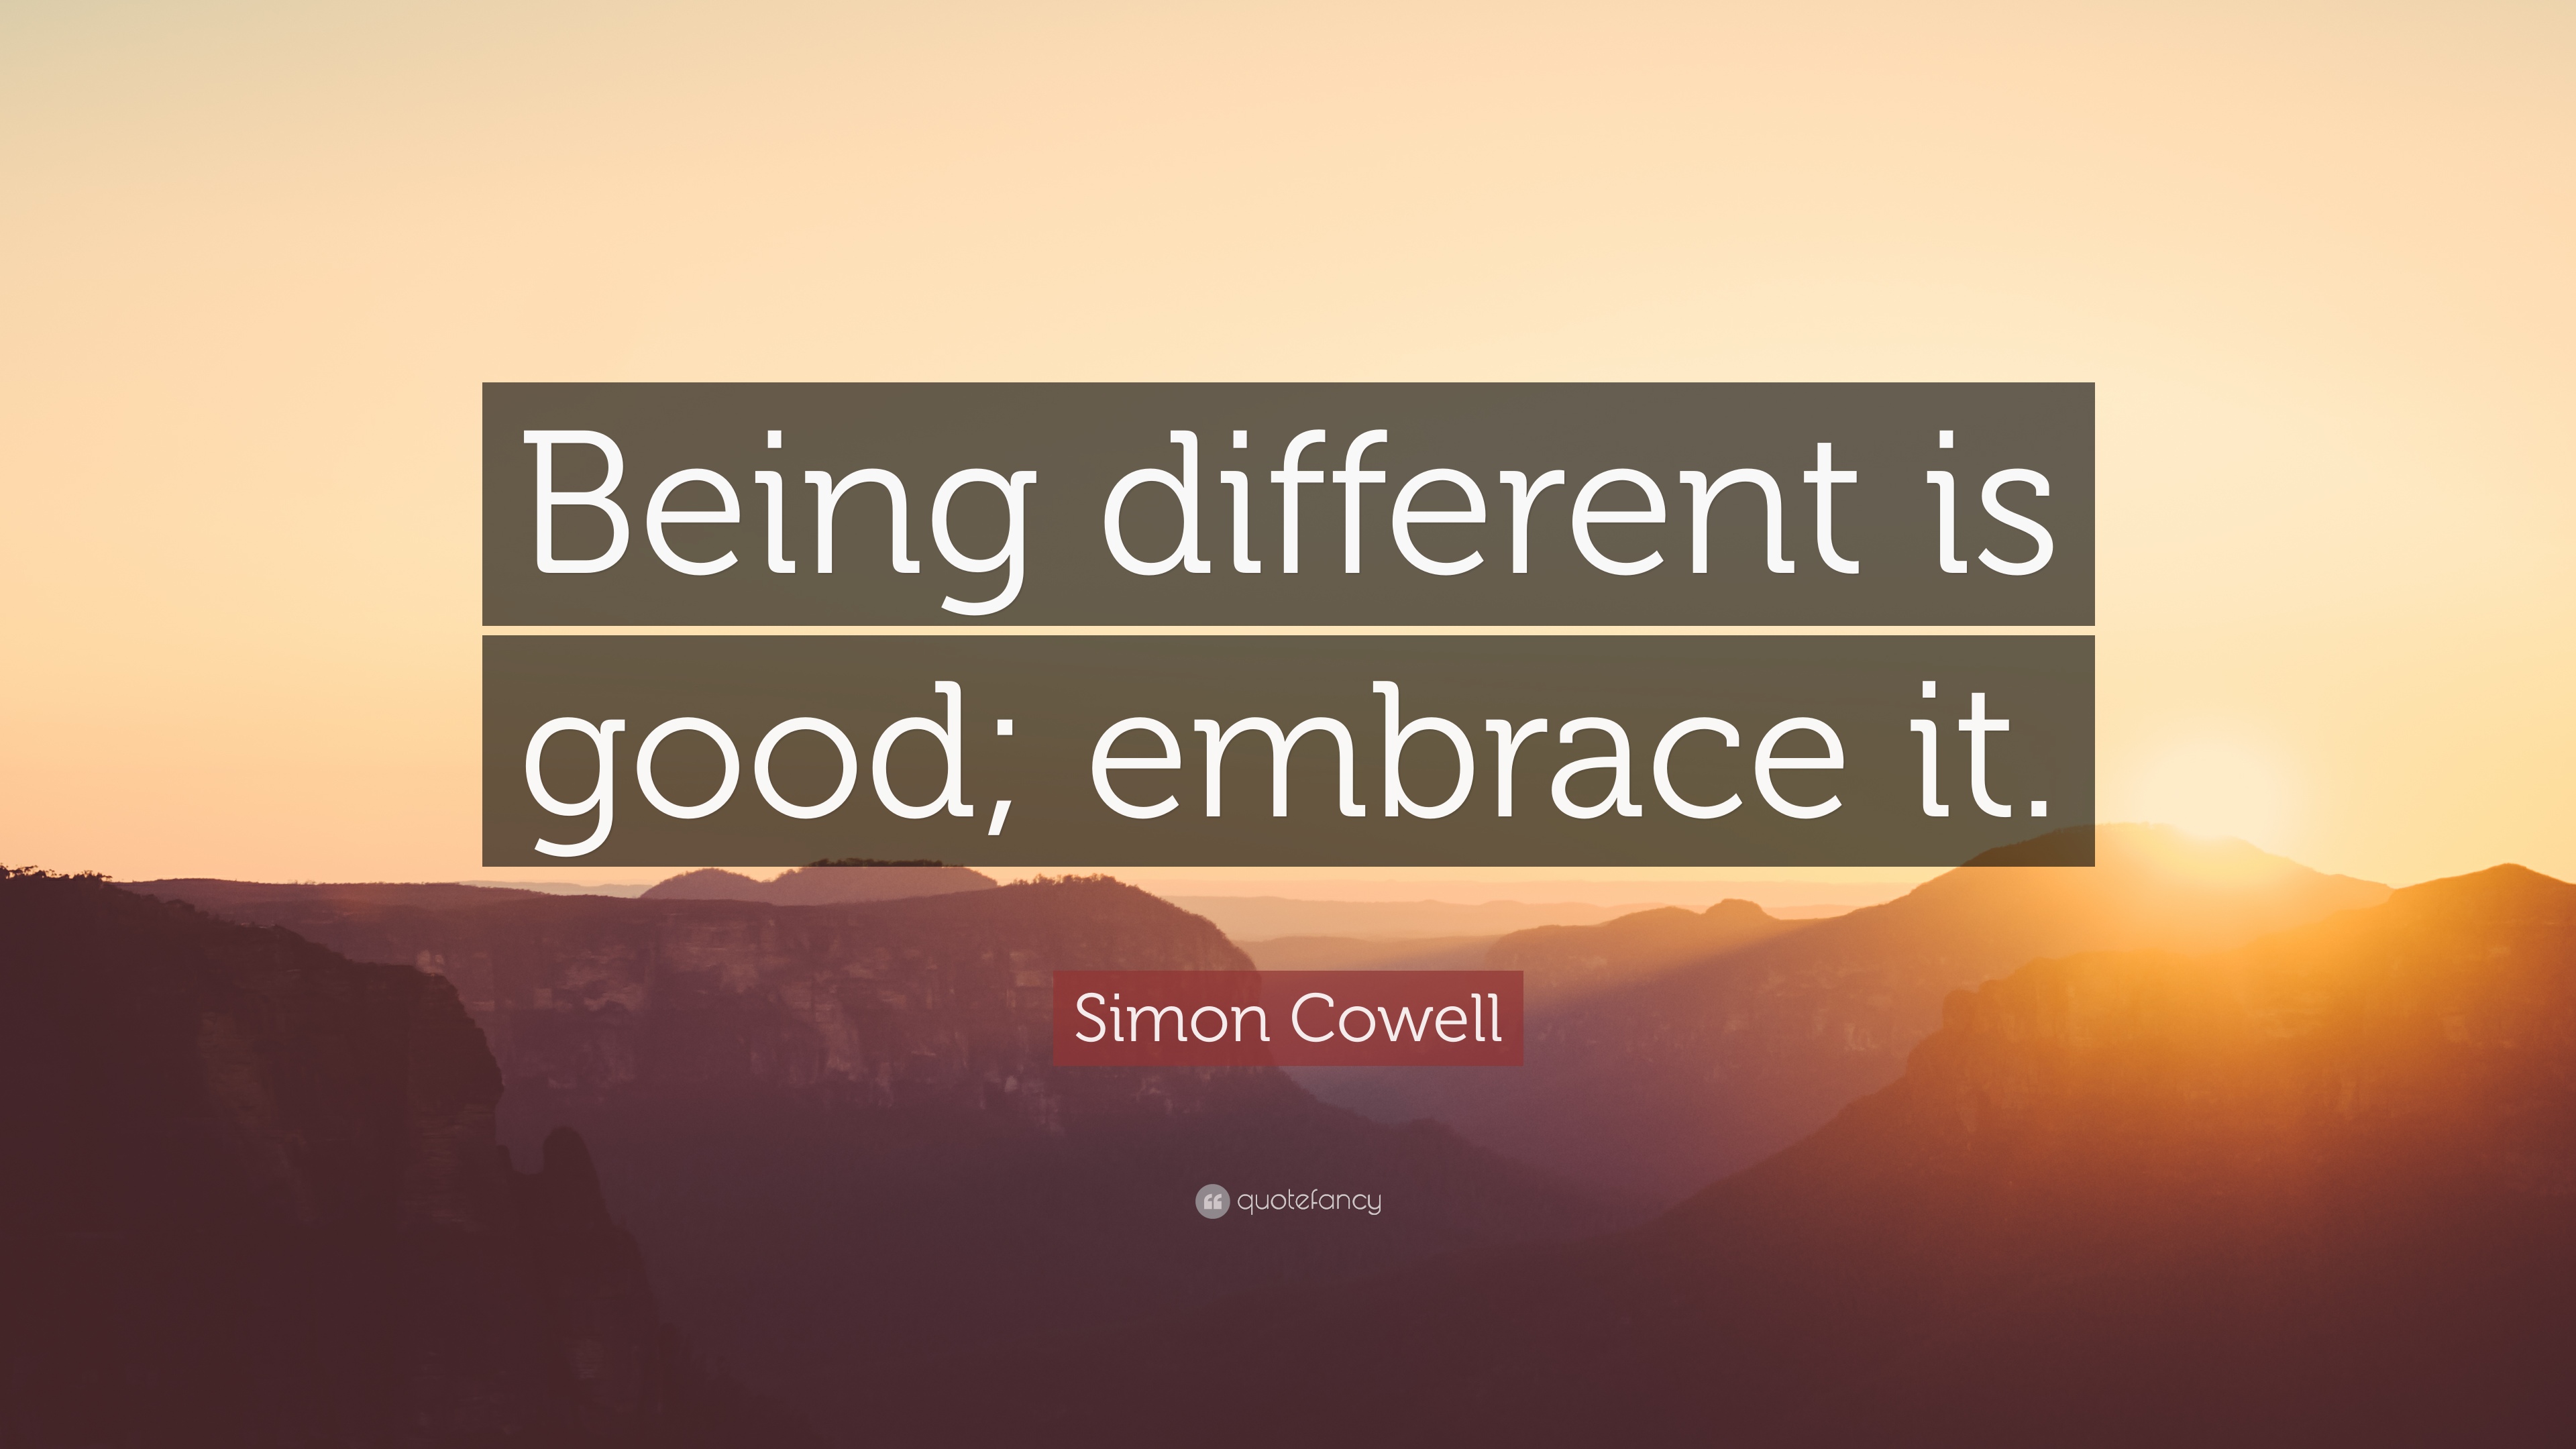 image of quote "Being different is good, embrace it"